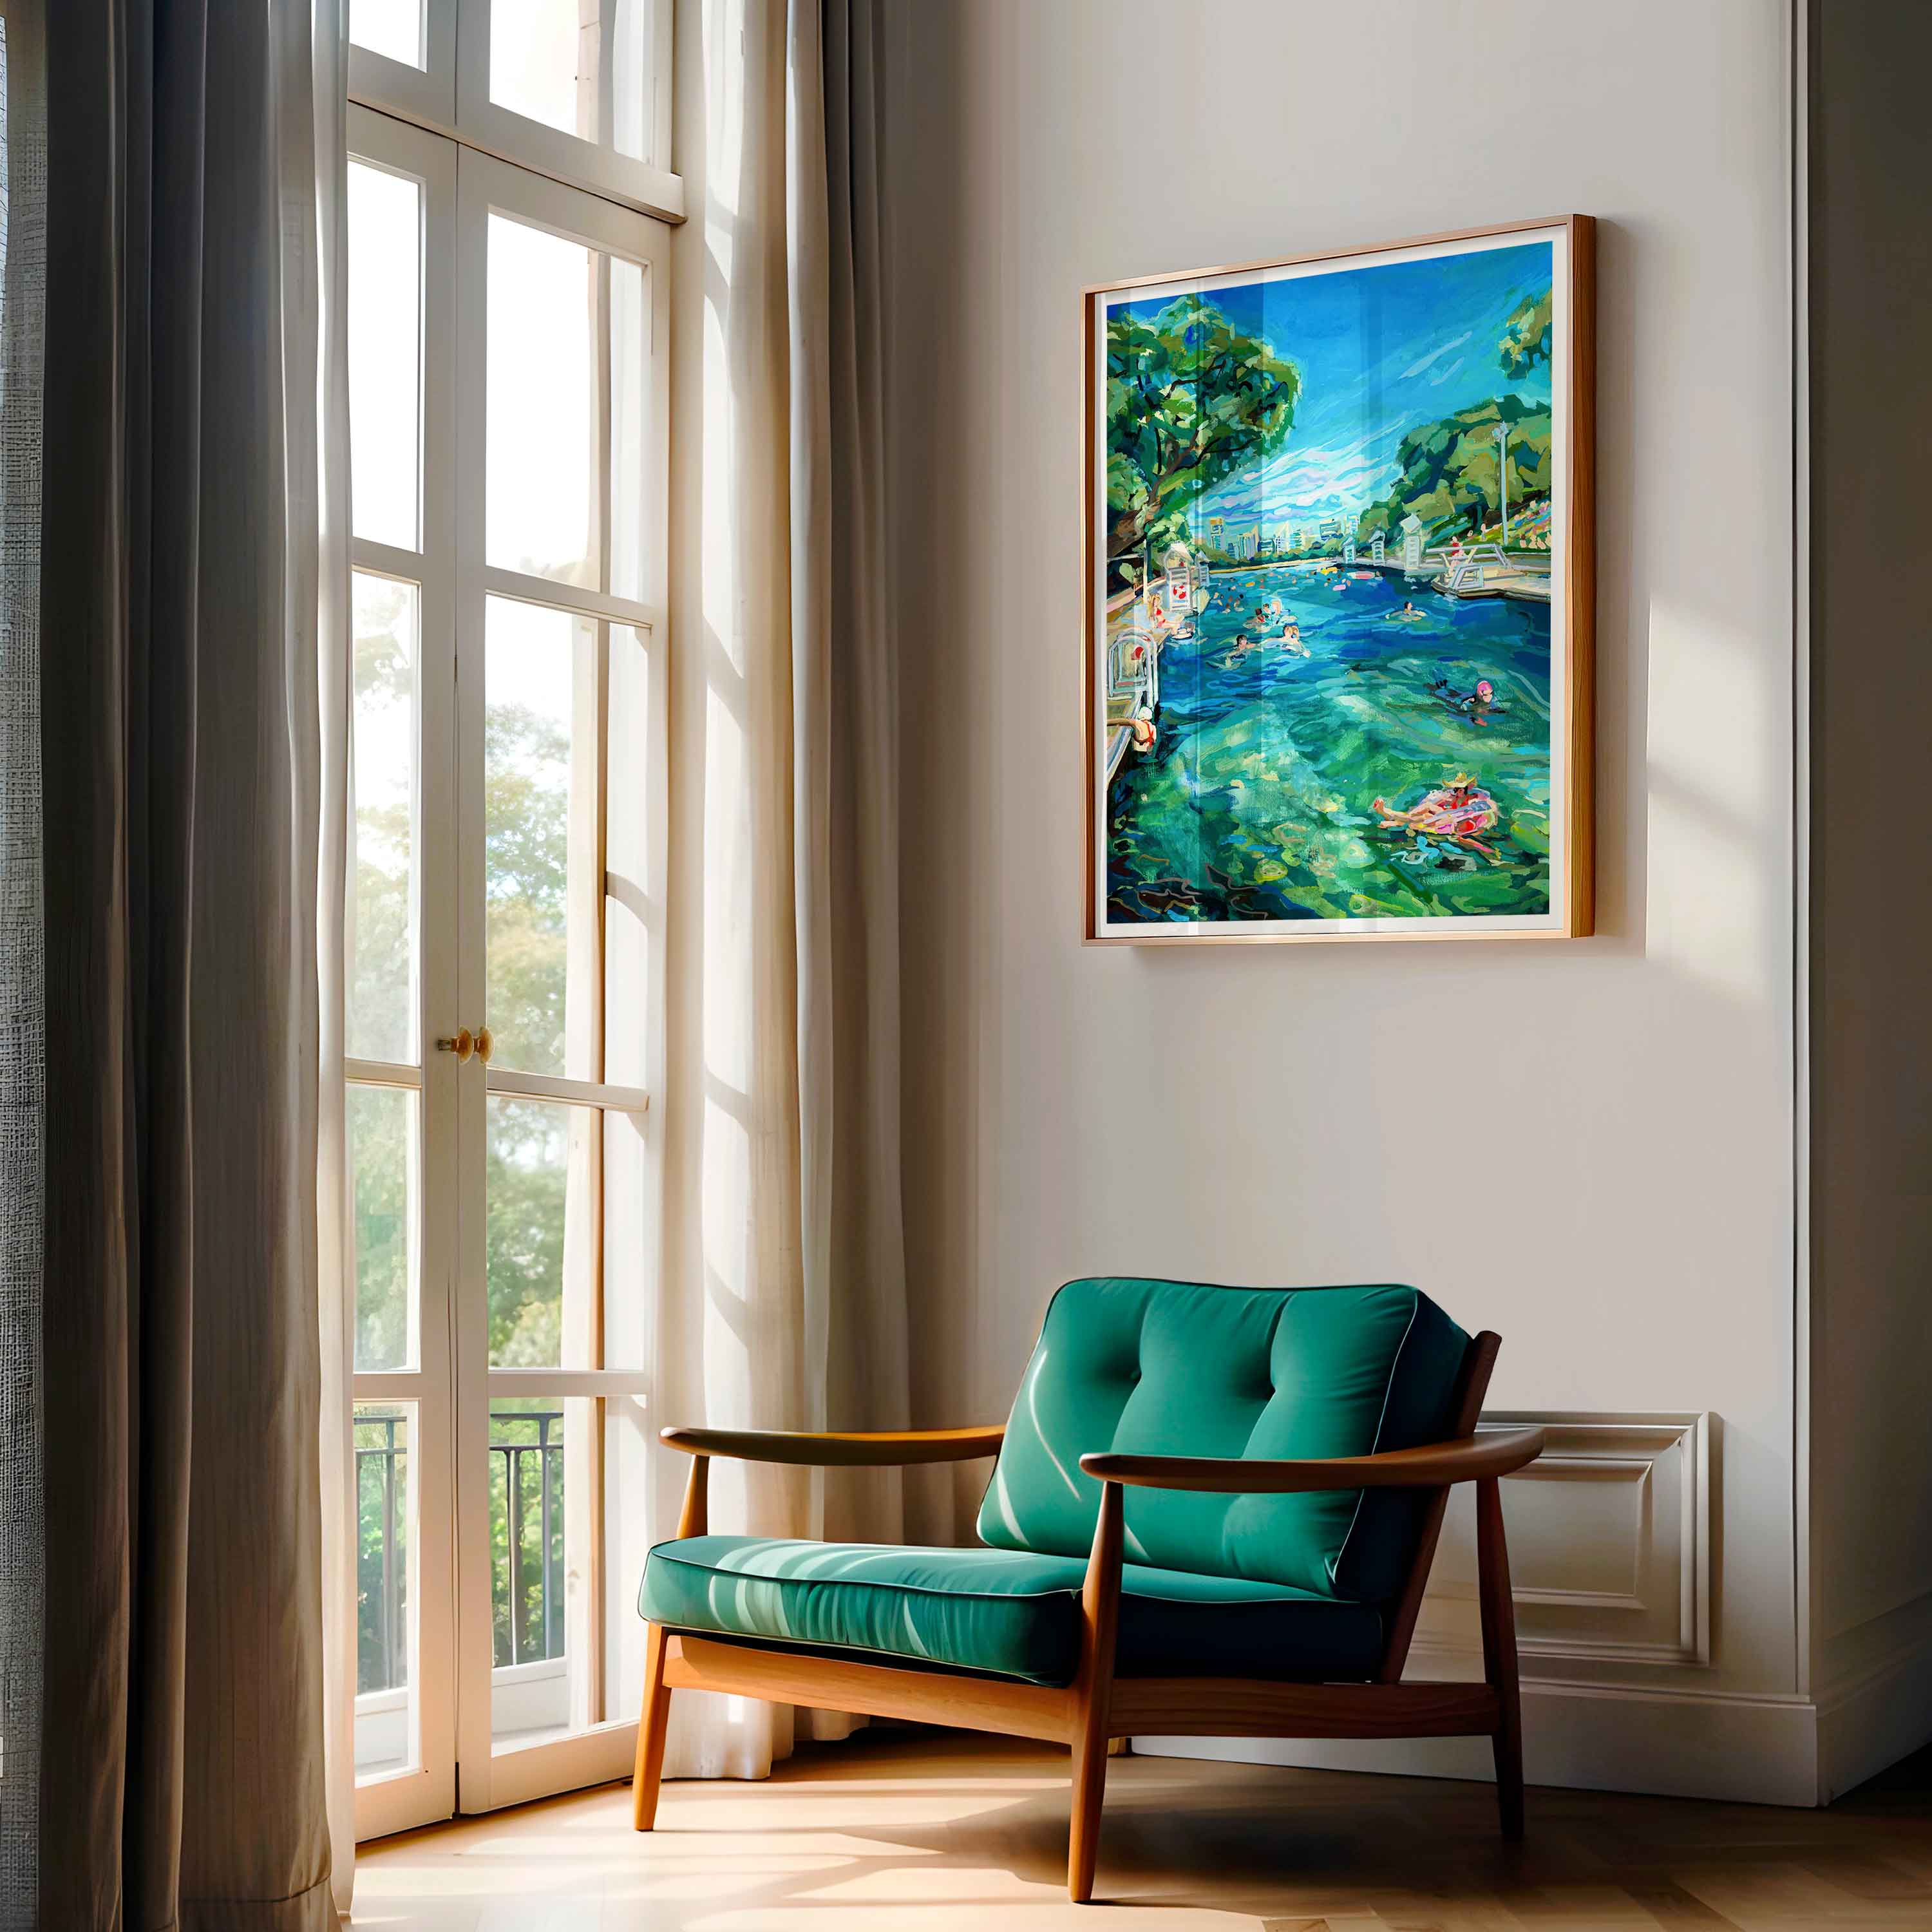 Barton Springs Austin Art for Living Room. Extra large Austin print of painting for modern living room with art deco green chair.